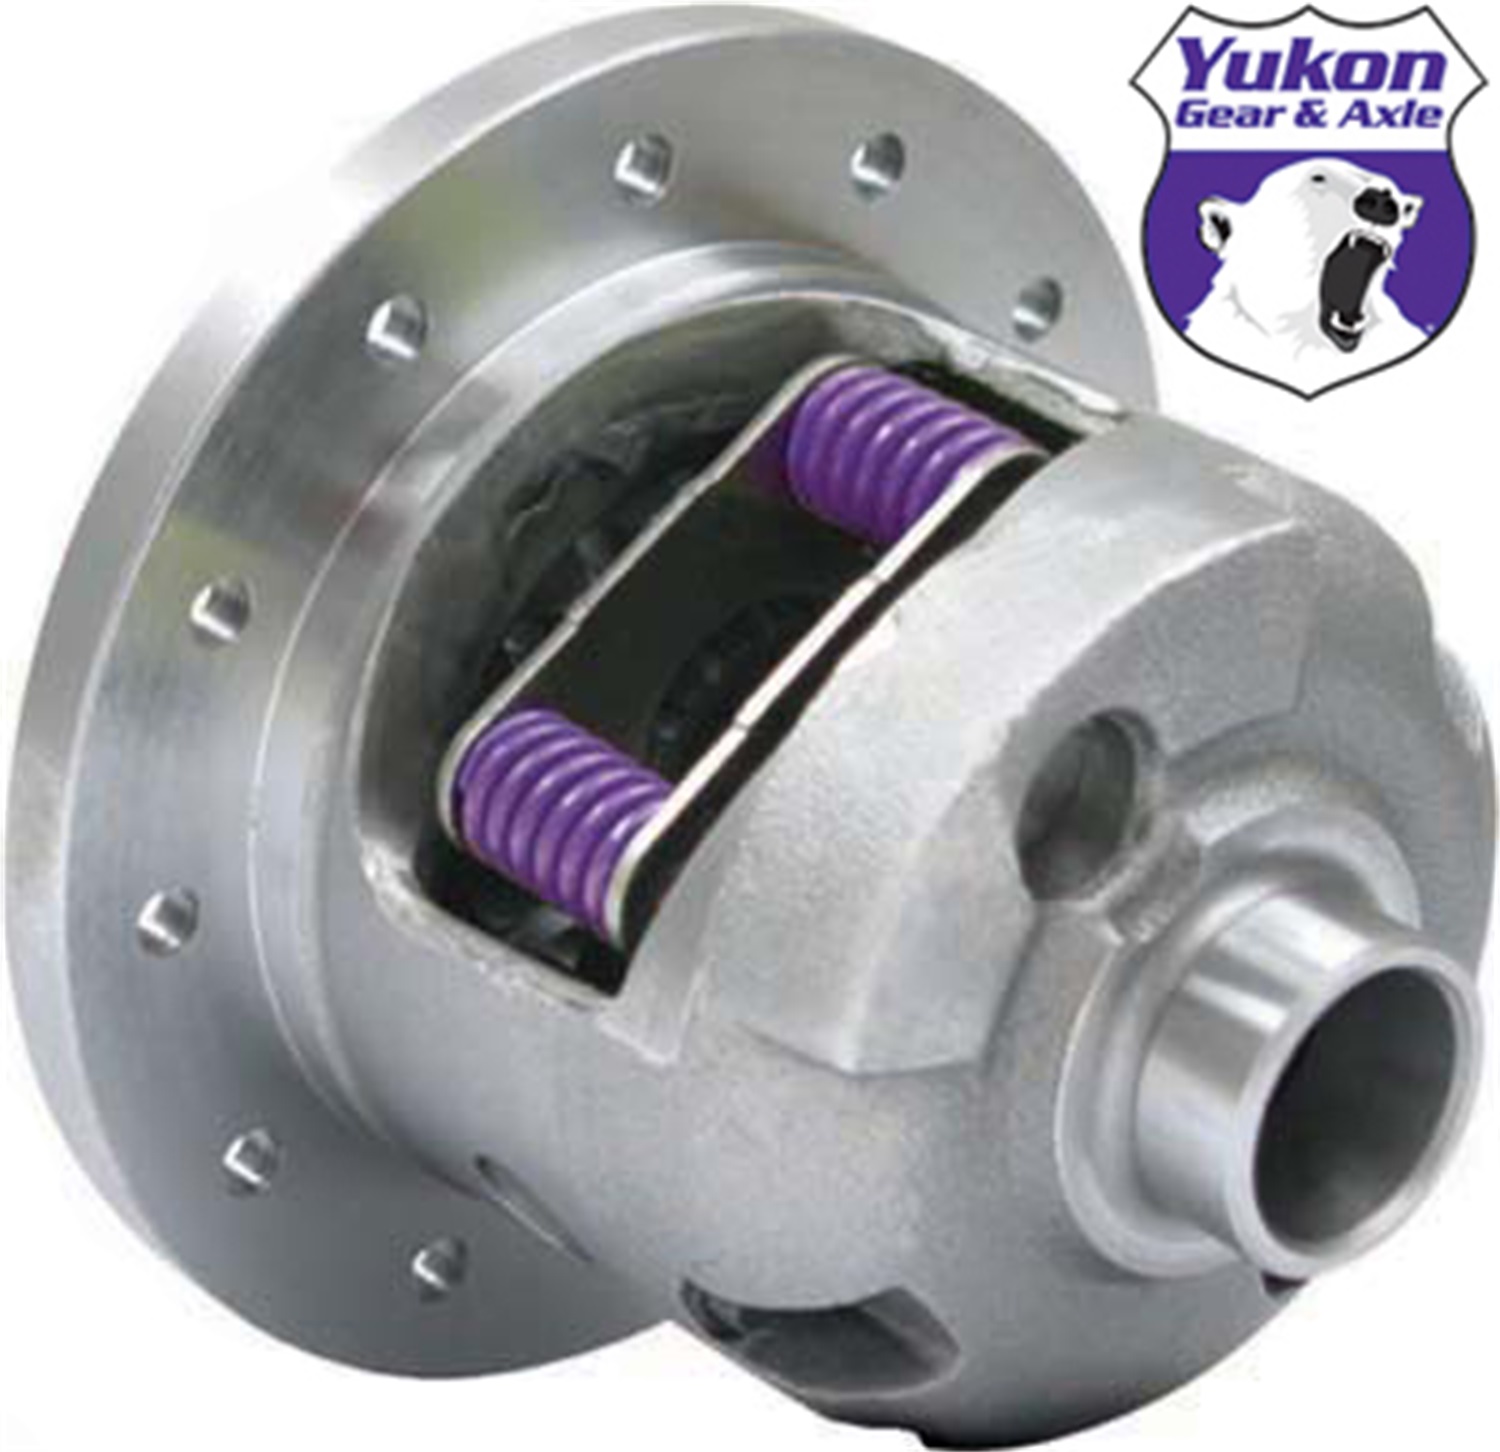 Yukon Gear & Axle Yukon Gear & Axle YDGGM8.5-3-30-1 Yukon Dura Grip Differential